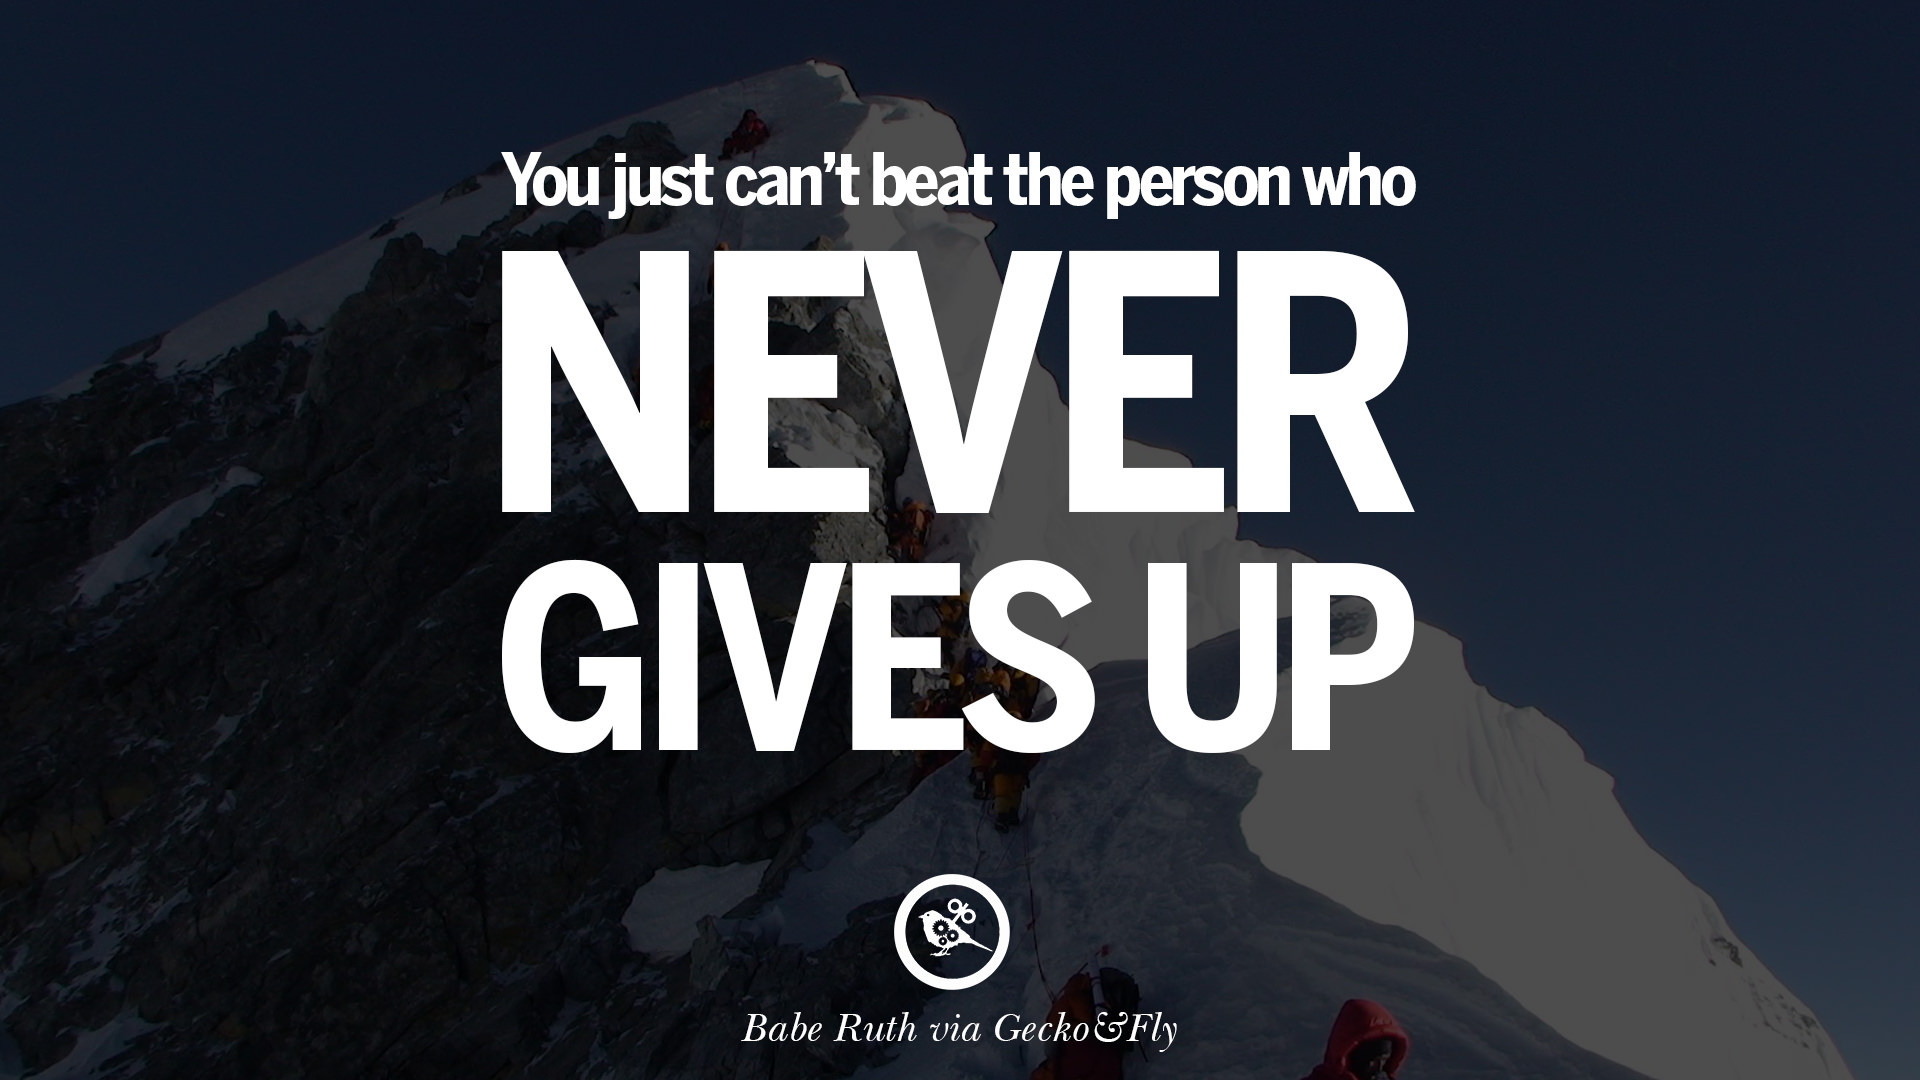 Athletics Inspirational Quotes
 20 Encouraging and Motivational Poster Quotes on Sports